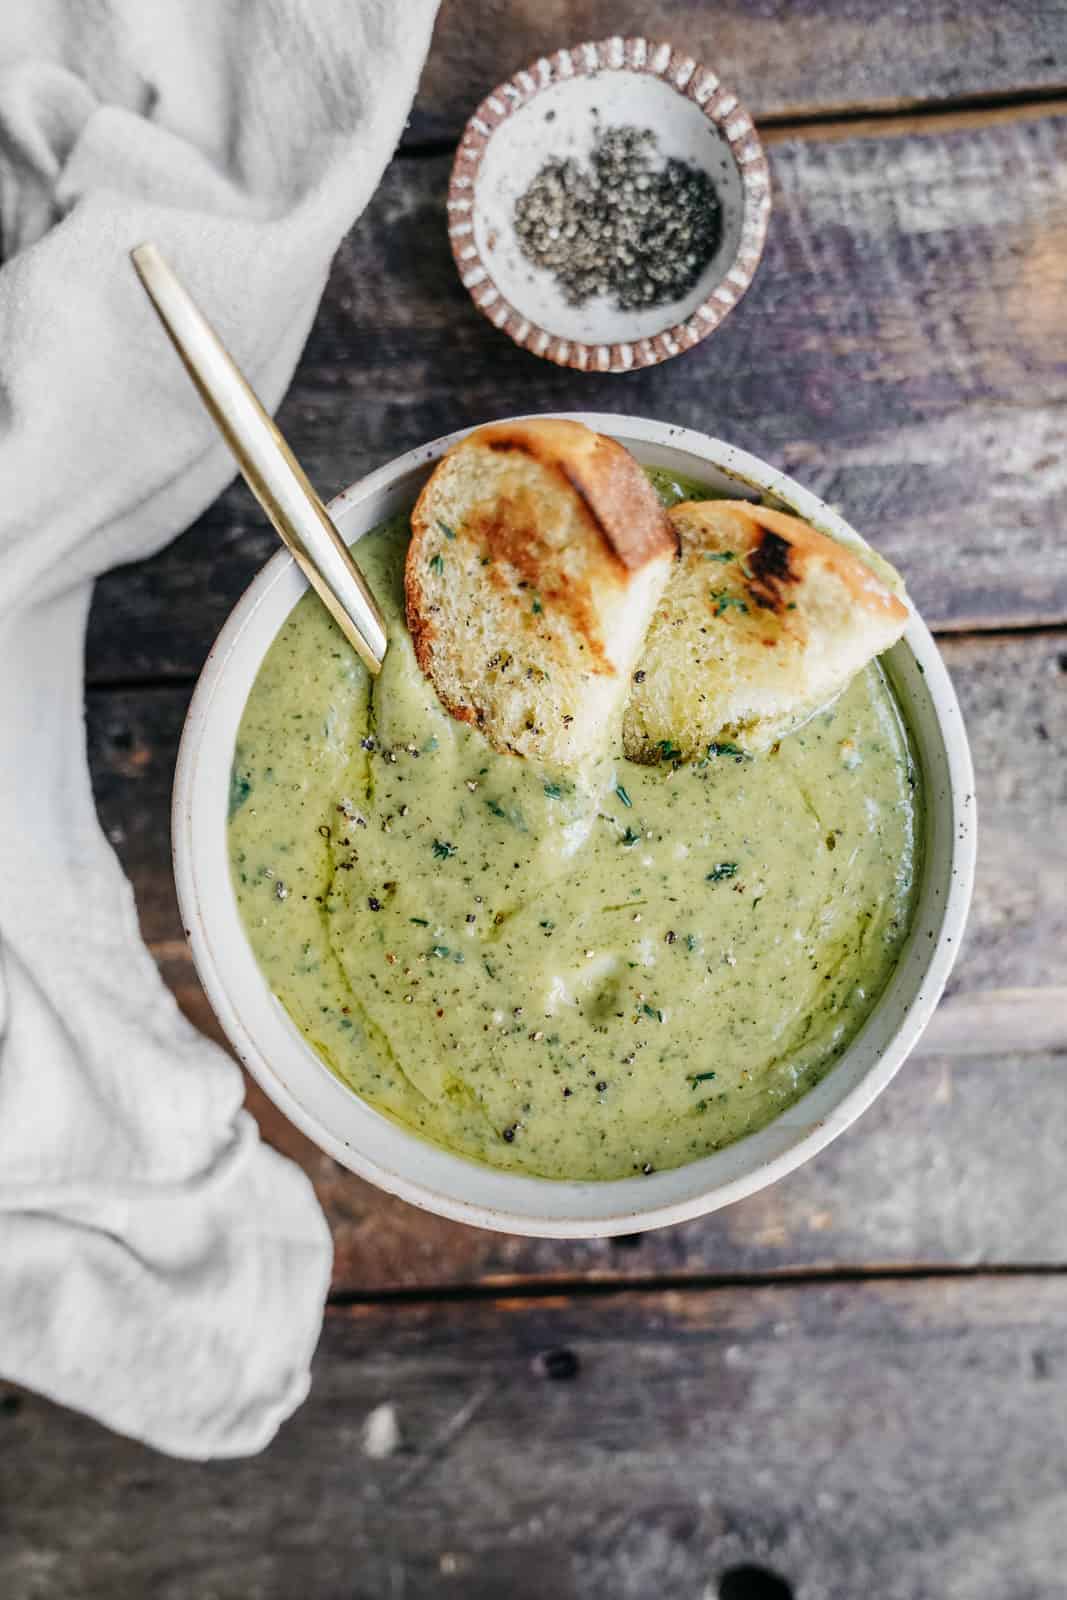 Creamy broccoli soup with pieces of bread served with it